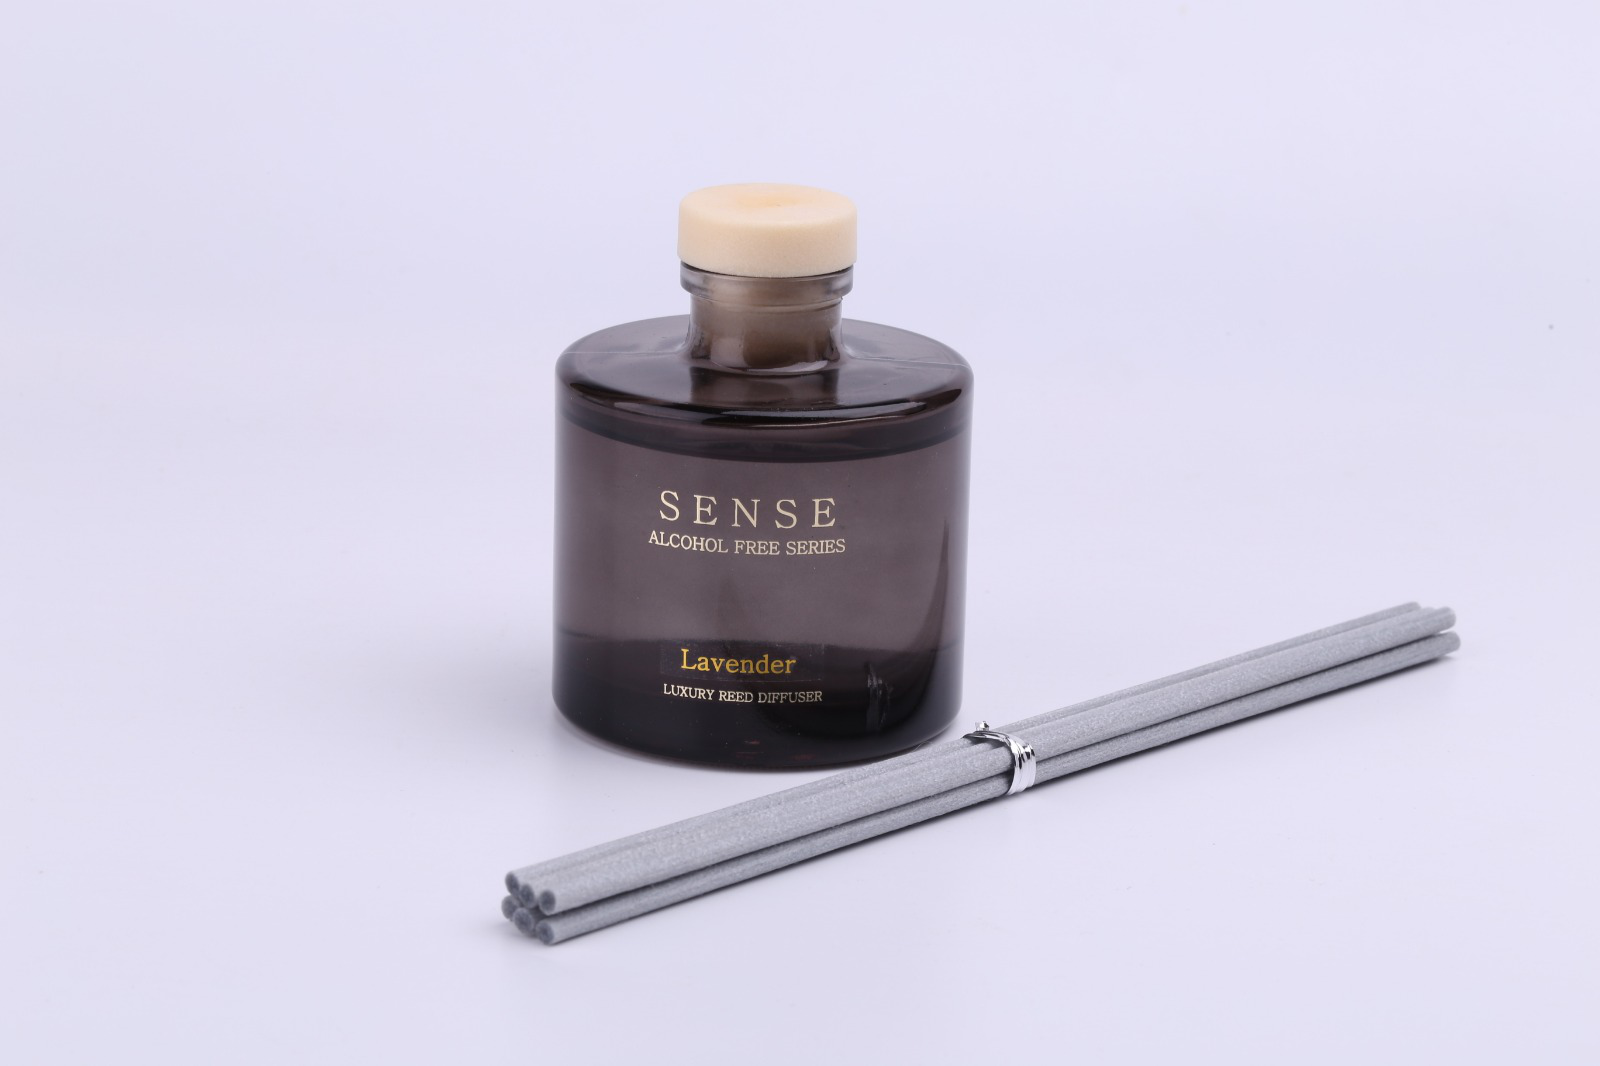 ALCOHOL FREE SERIES Reed Diffuser The Sense House